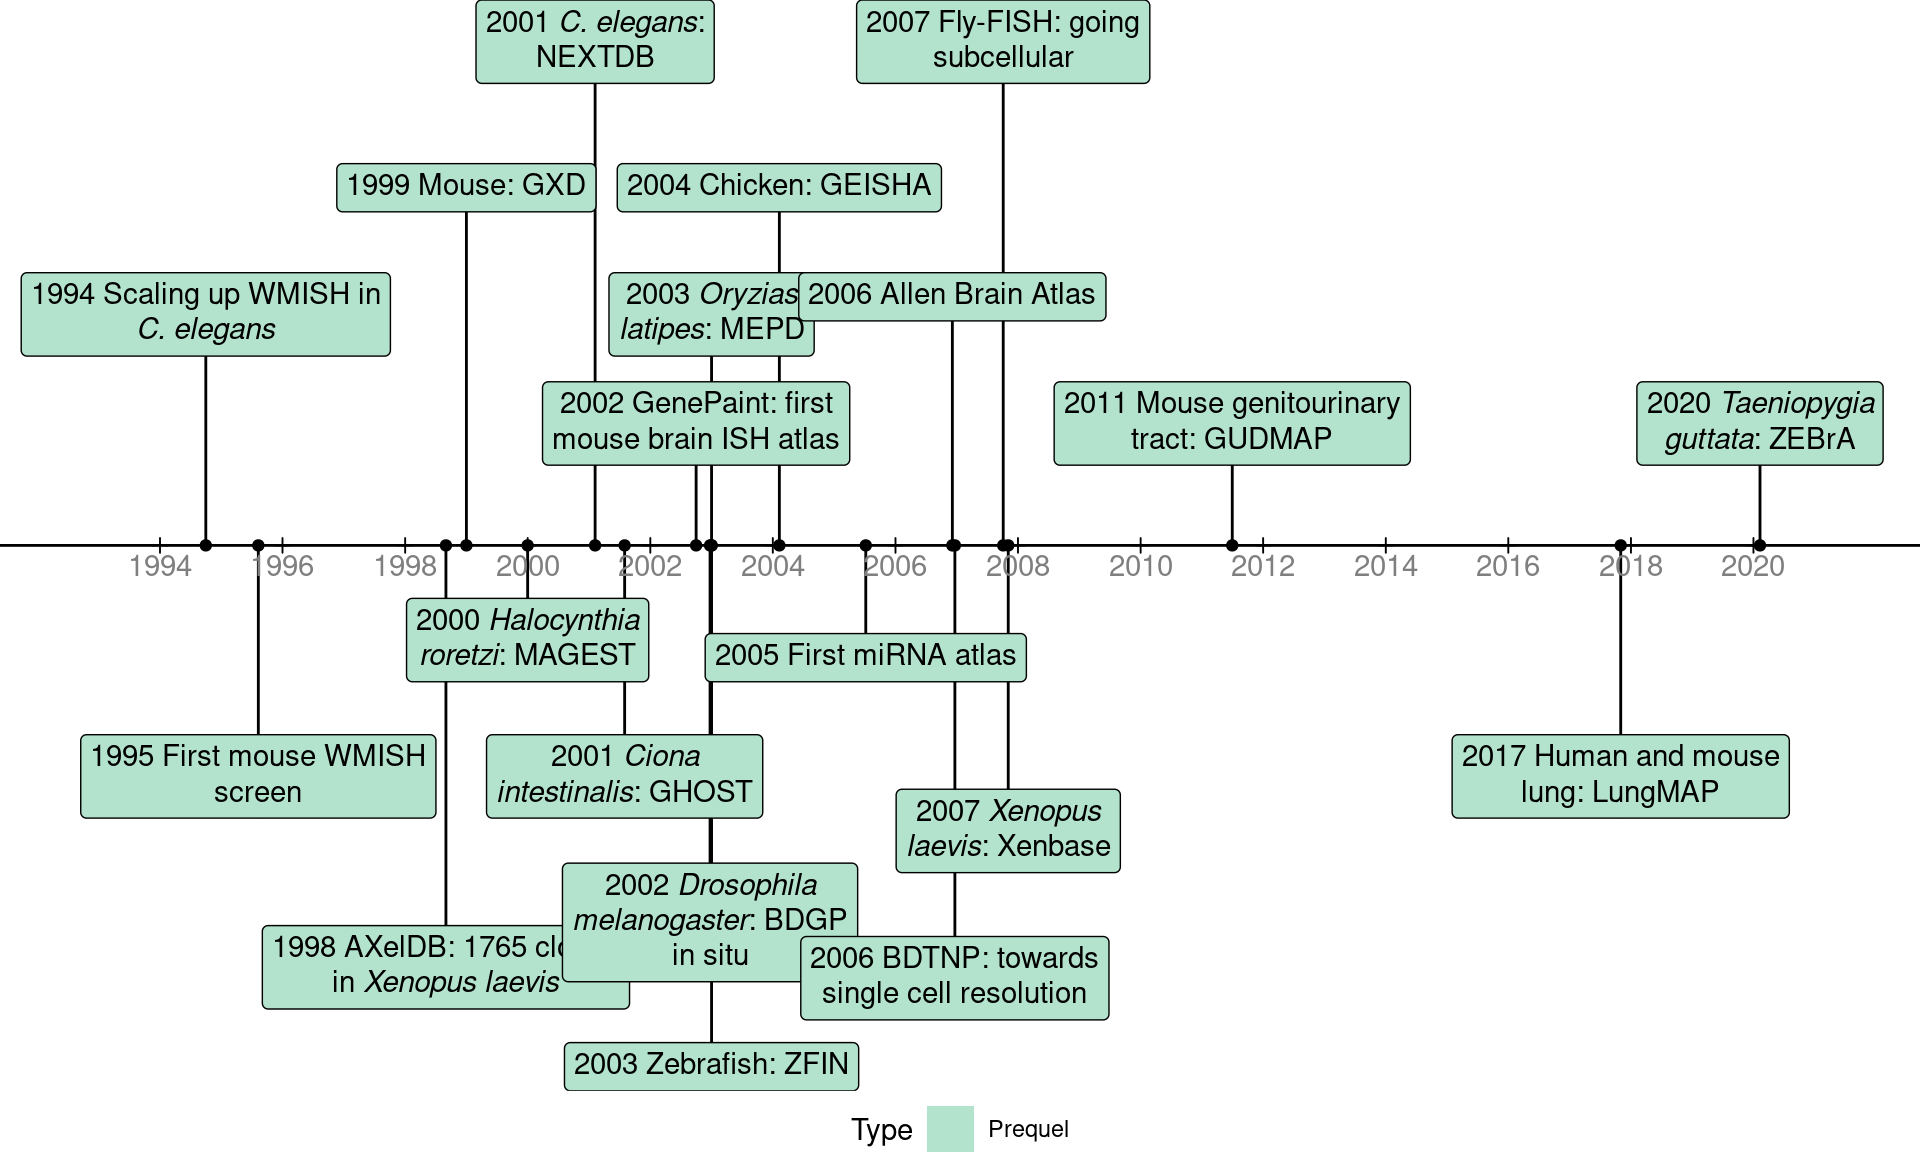 Timeline of the first (WM)ISH databases for each species for which such databases are available, as well as some notable databases.